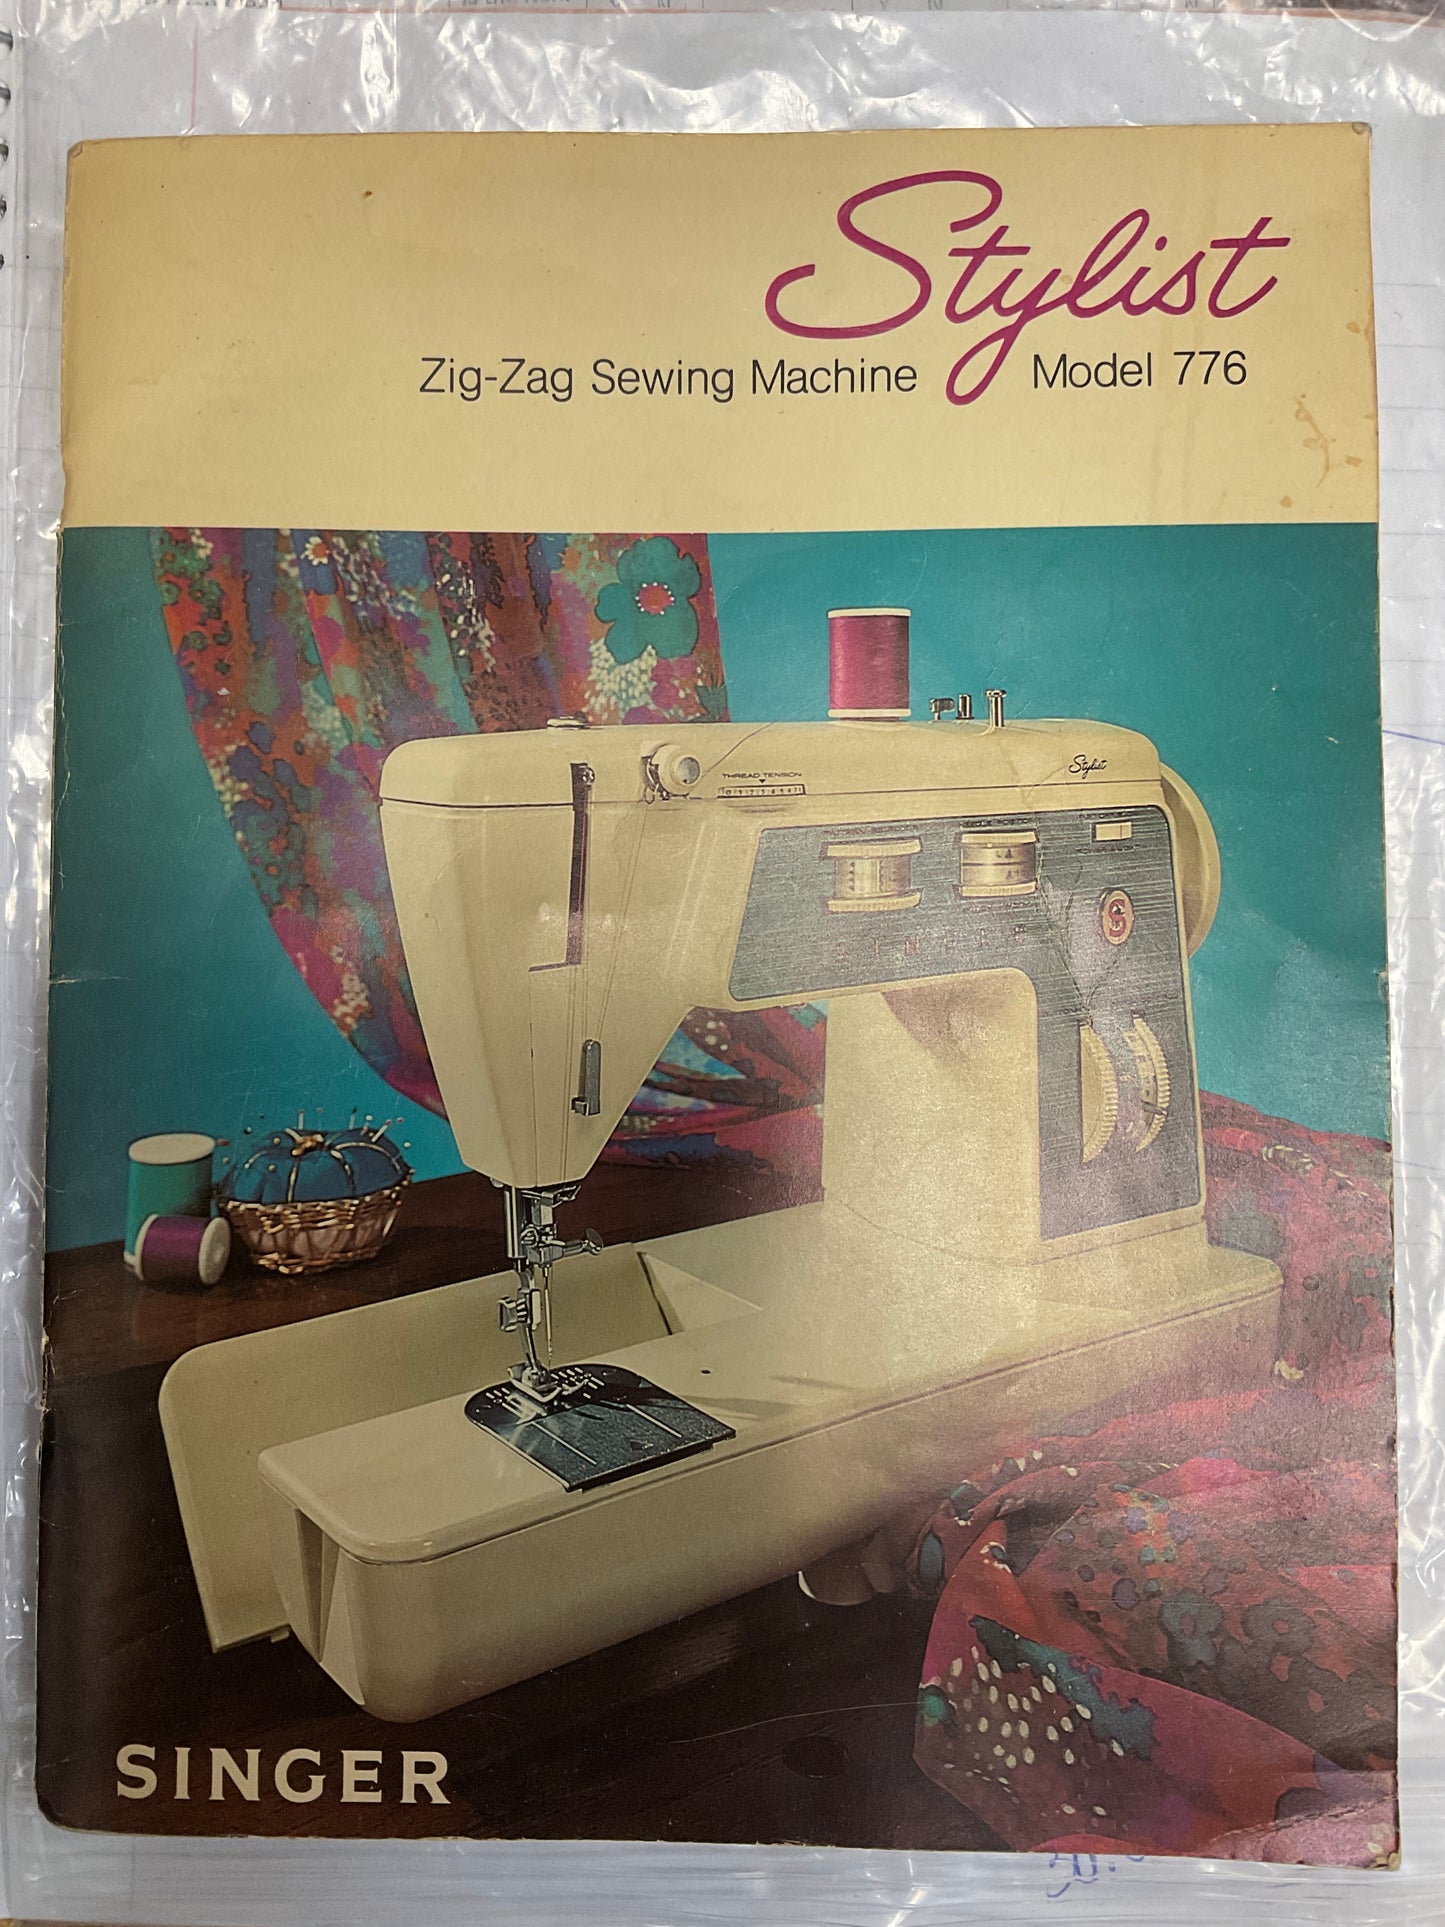 Singer Stylist 776 Sewing Machine and Desk